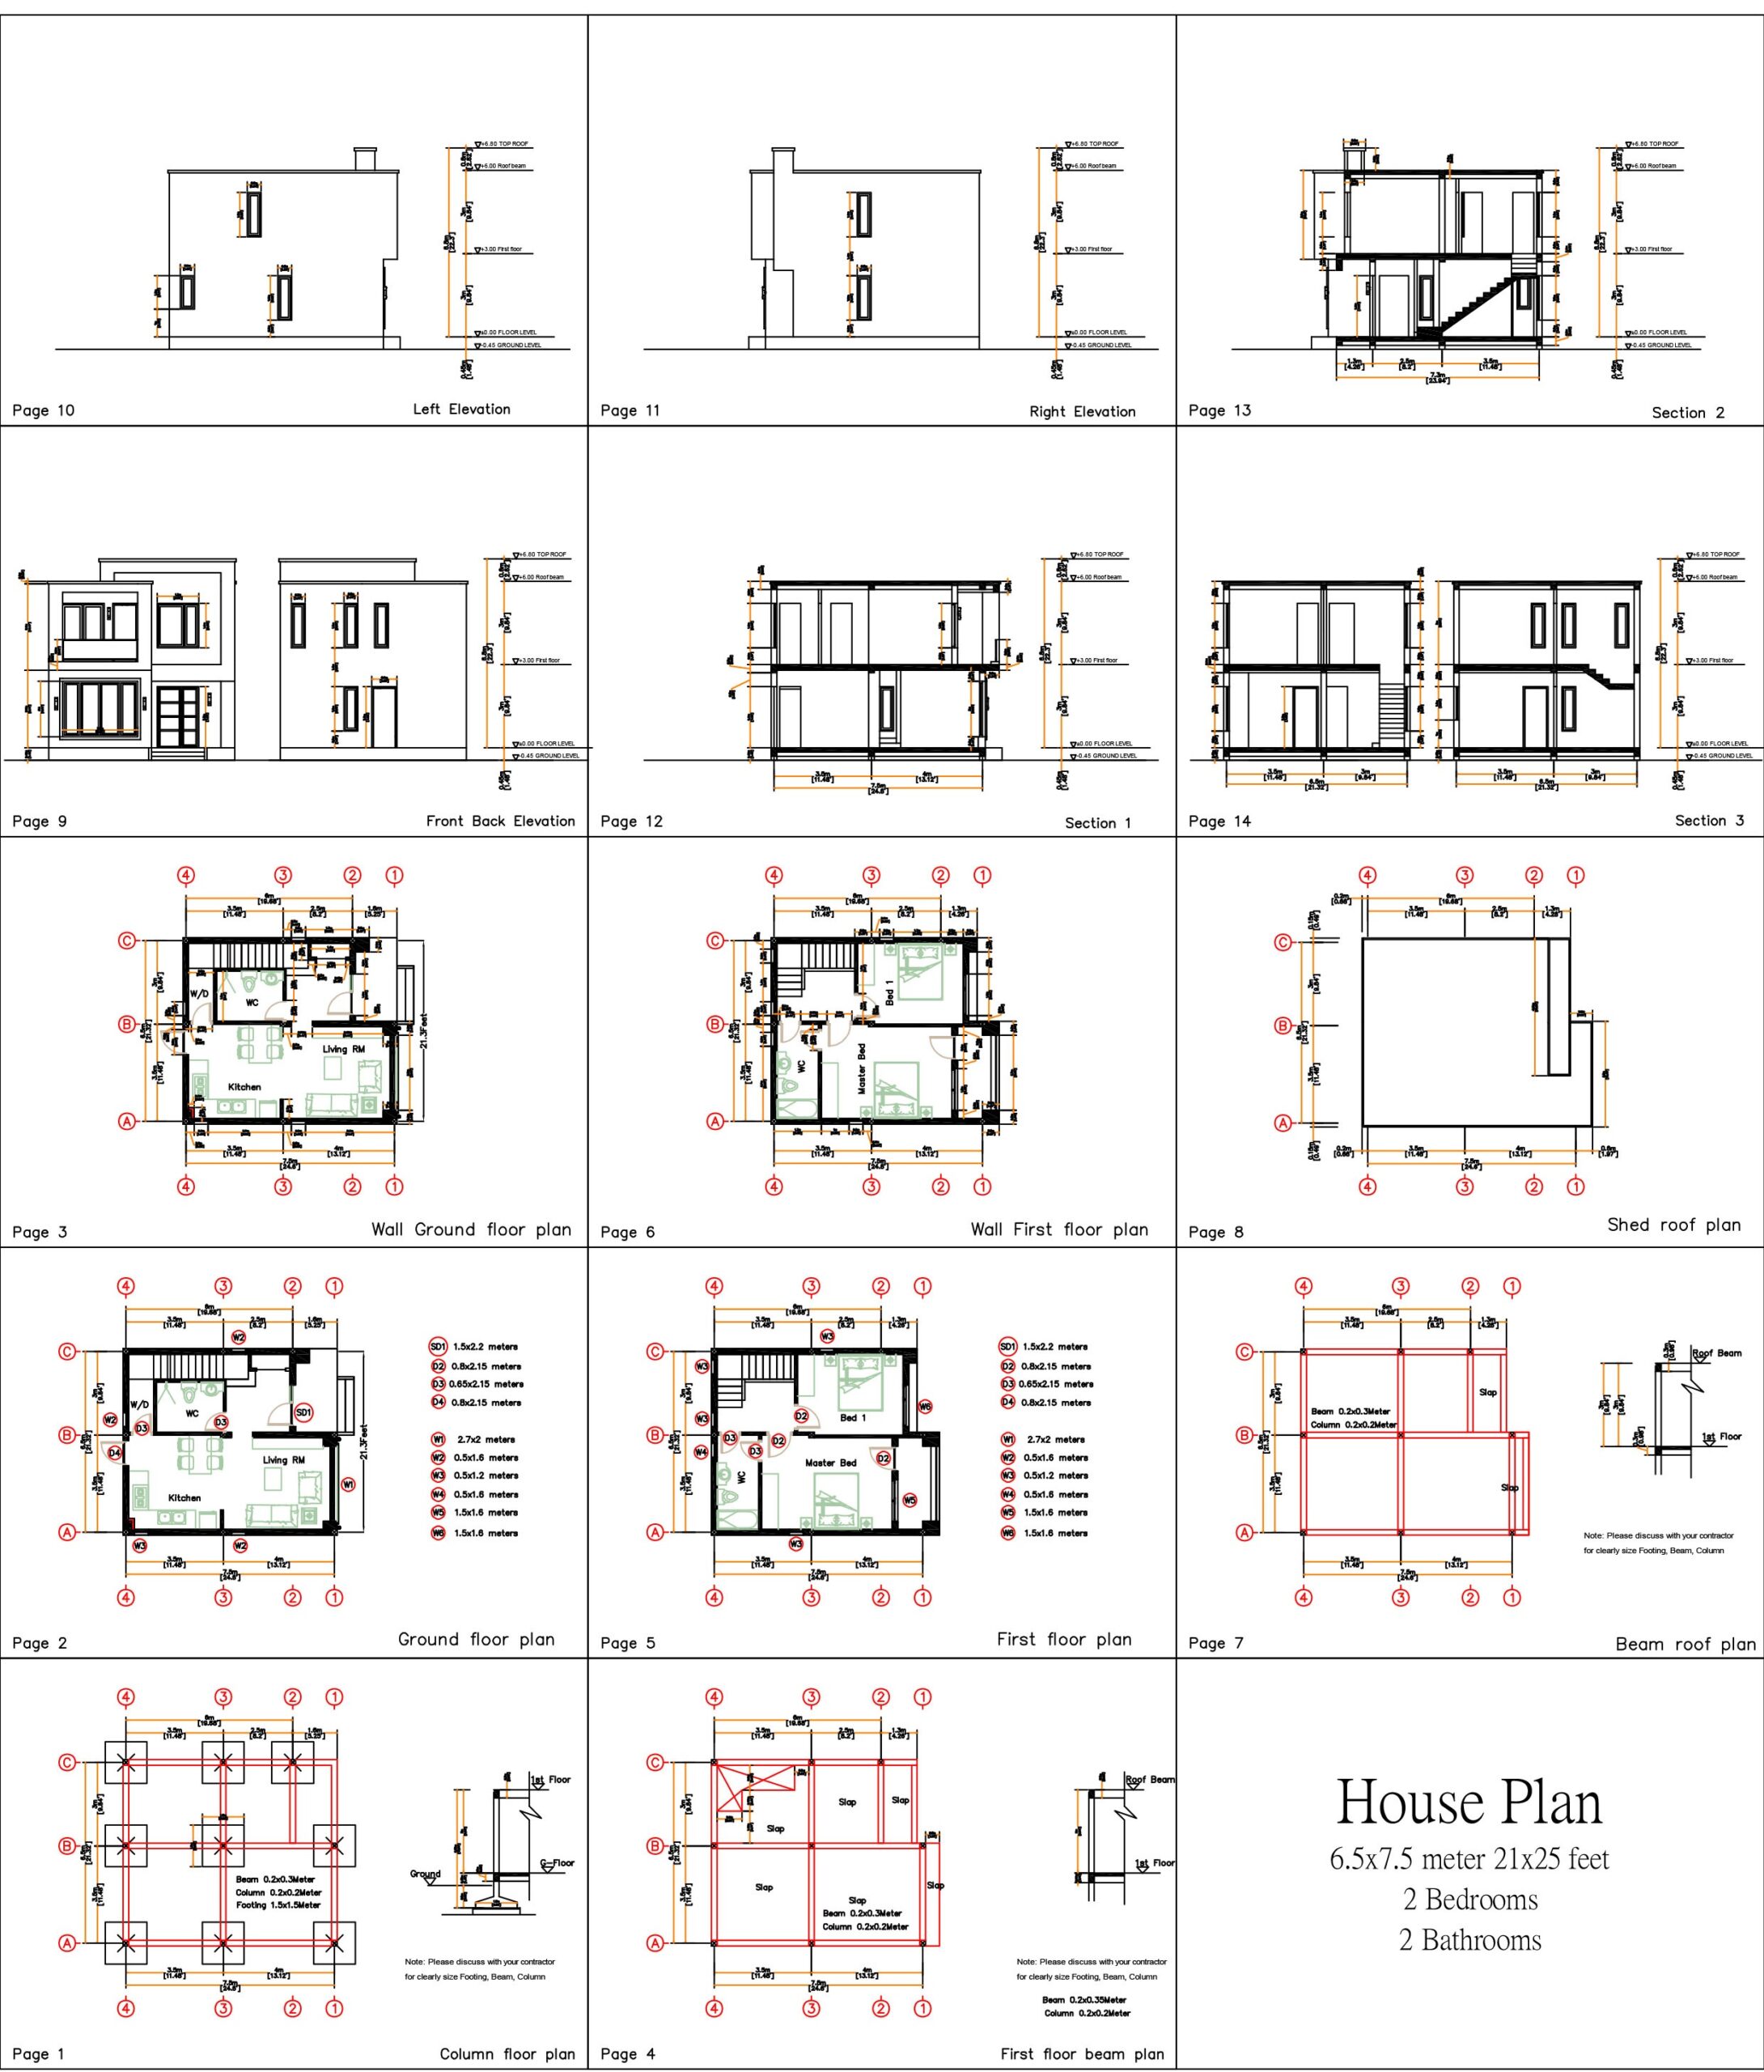 Small House Design 6.5x7.5 Meter 21x25 Feet 2 Bedrooms PDF Full Plan All layout plan